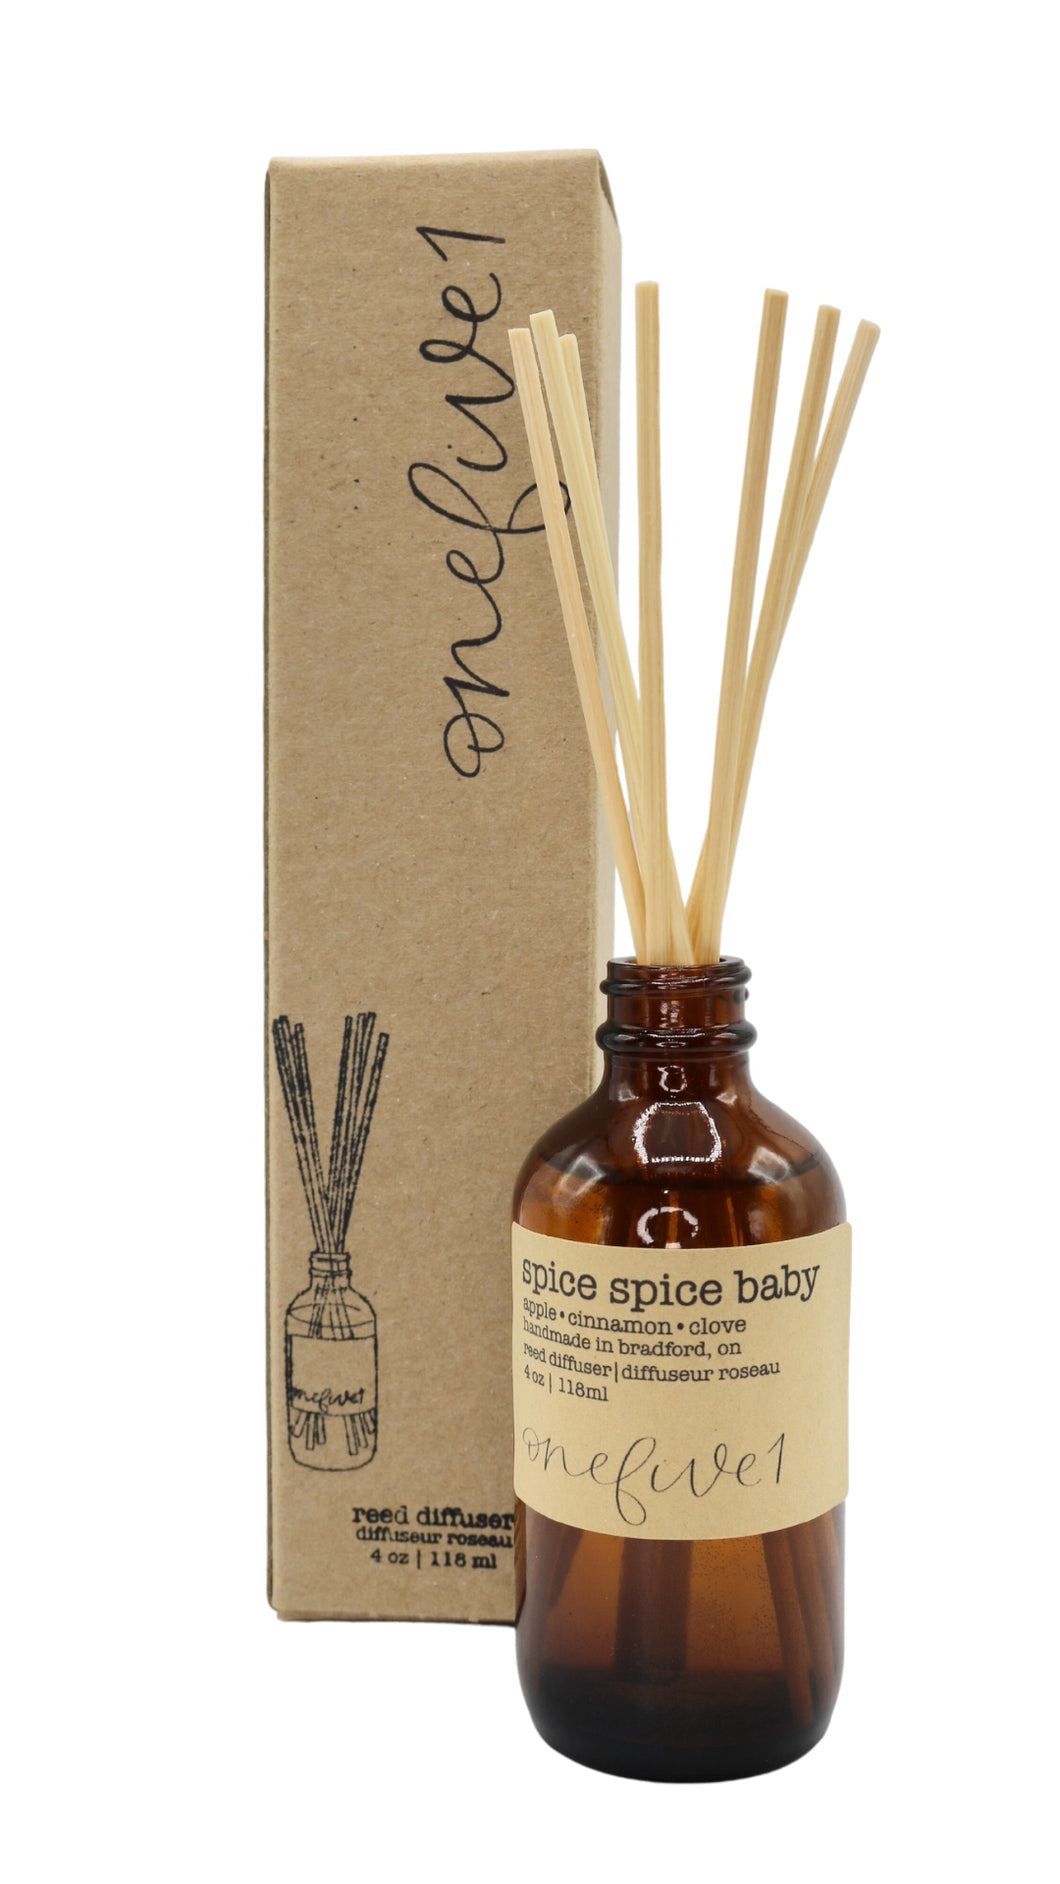 spice spice baby reed diffuser